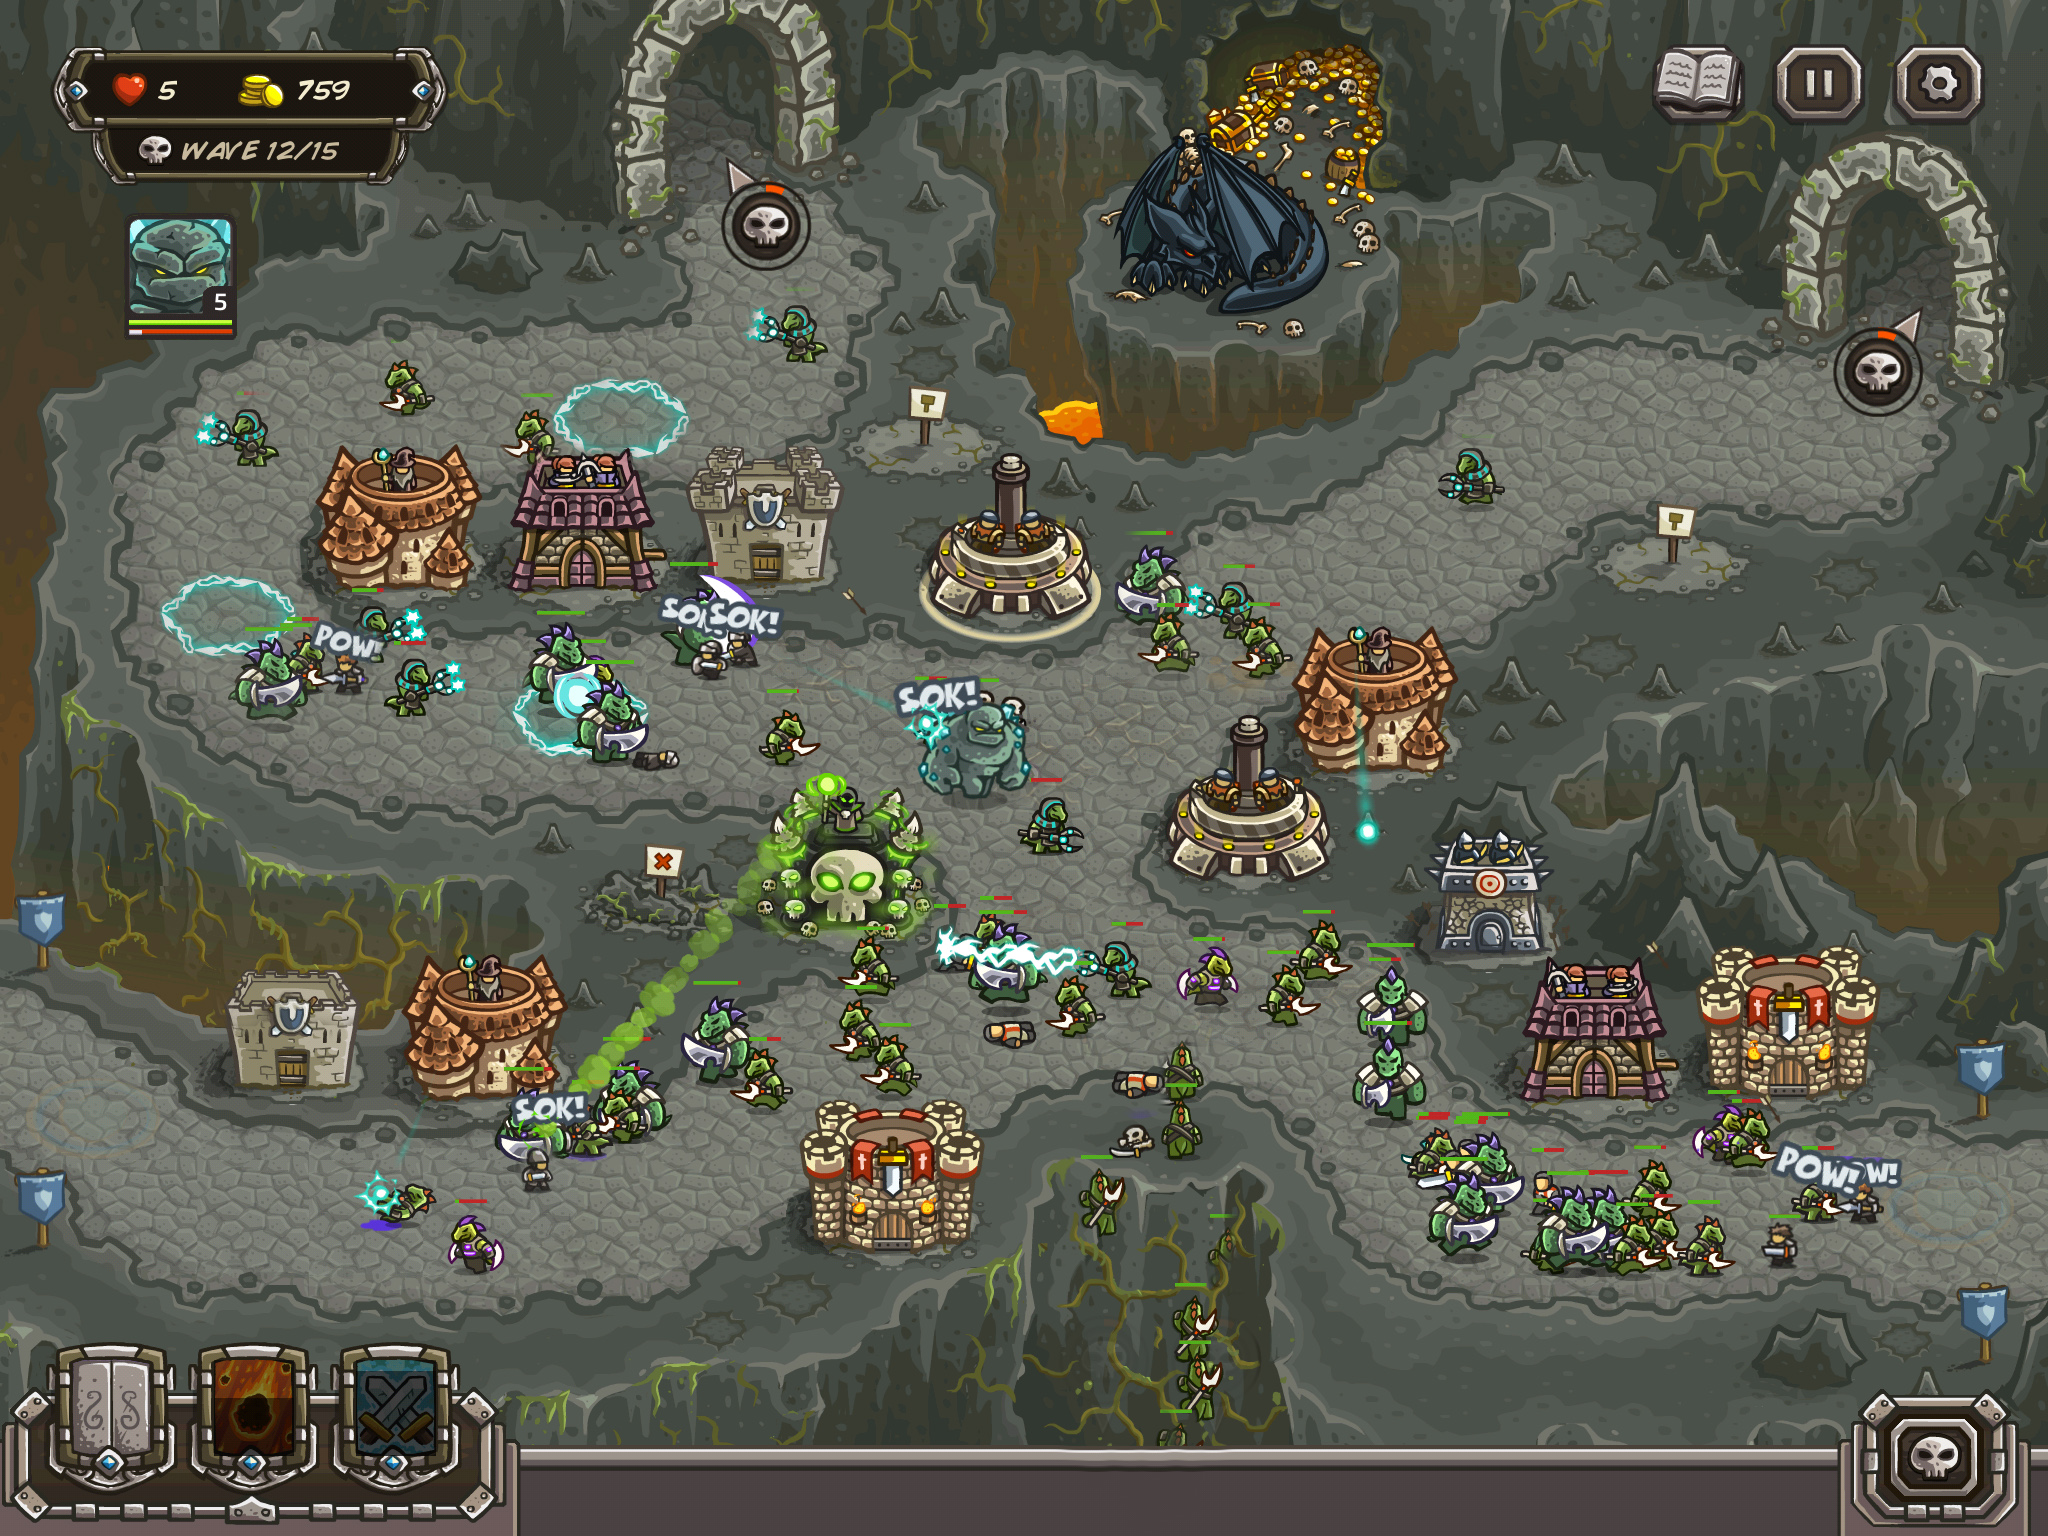 kingdom rush frontiers free game